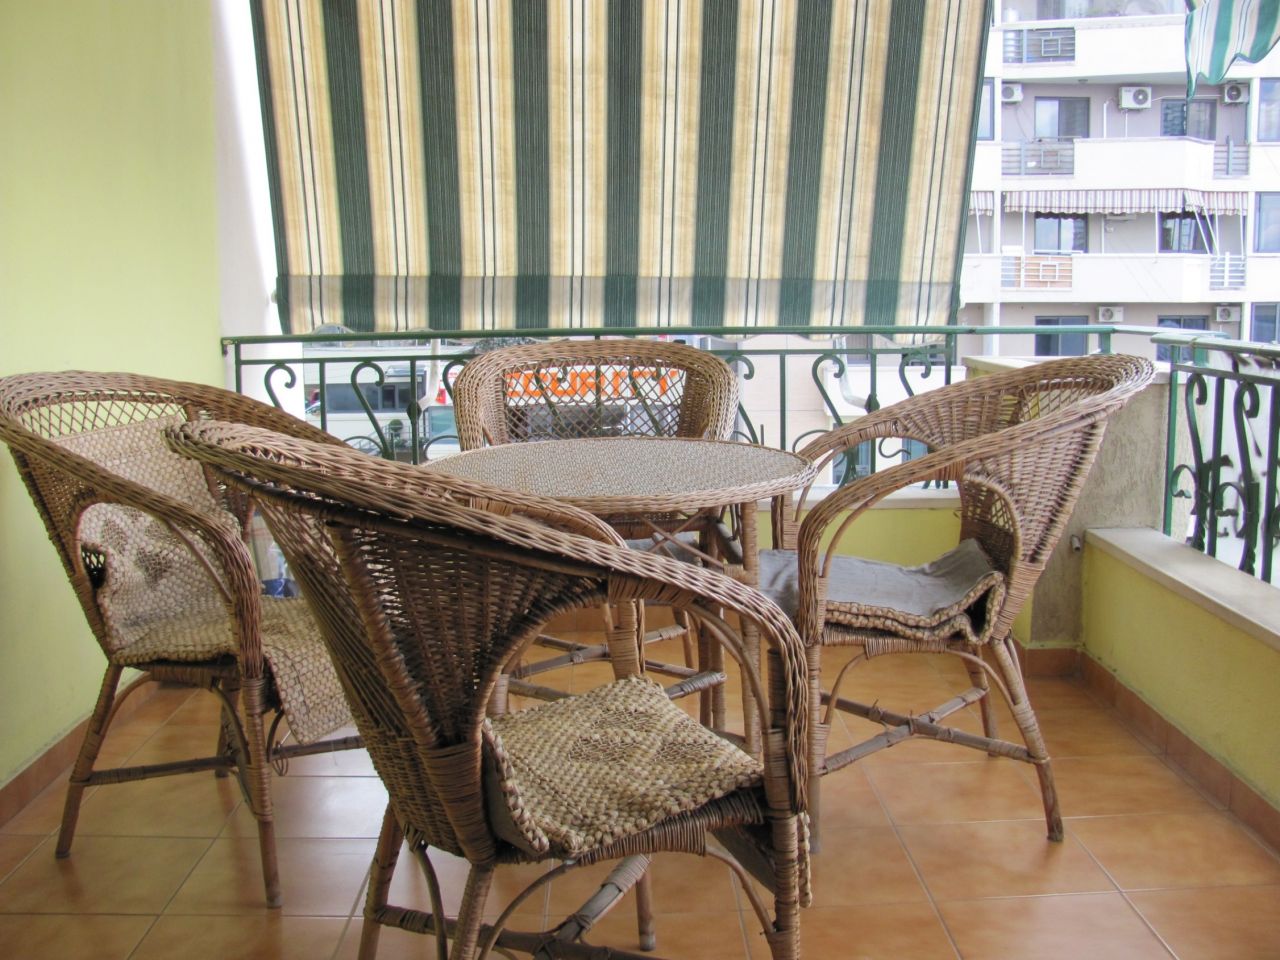 2 bedroom apartment for sale in a very good area in tirana, albania. the kitchen has all necessary equipment